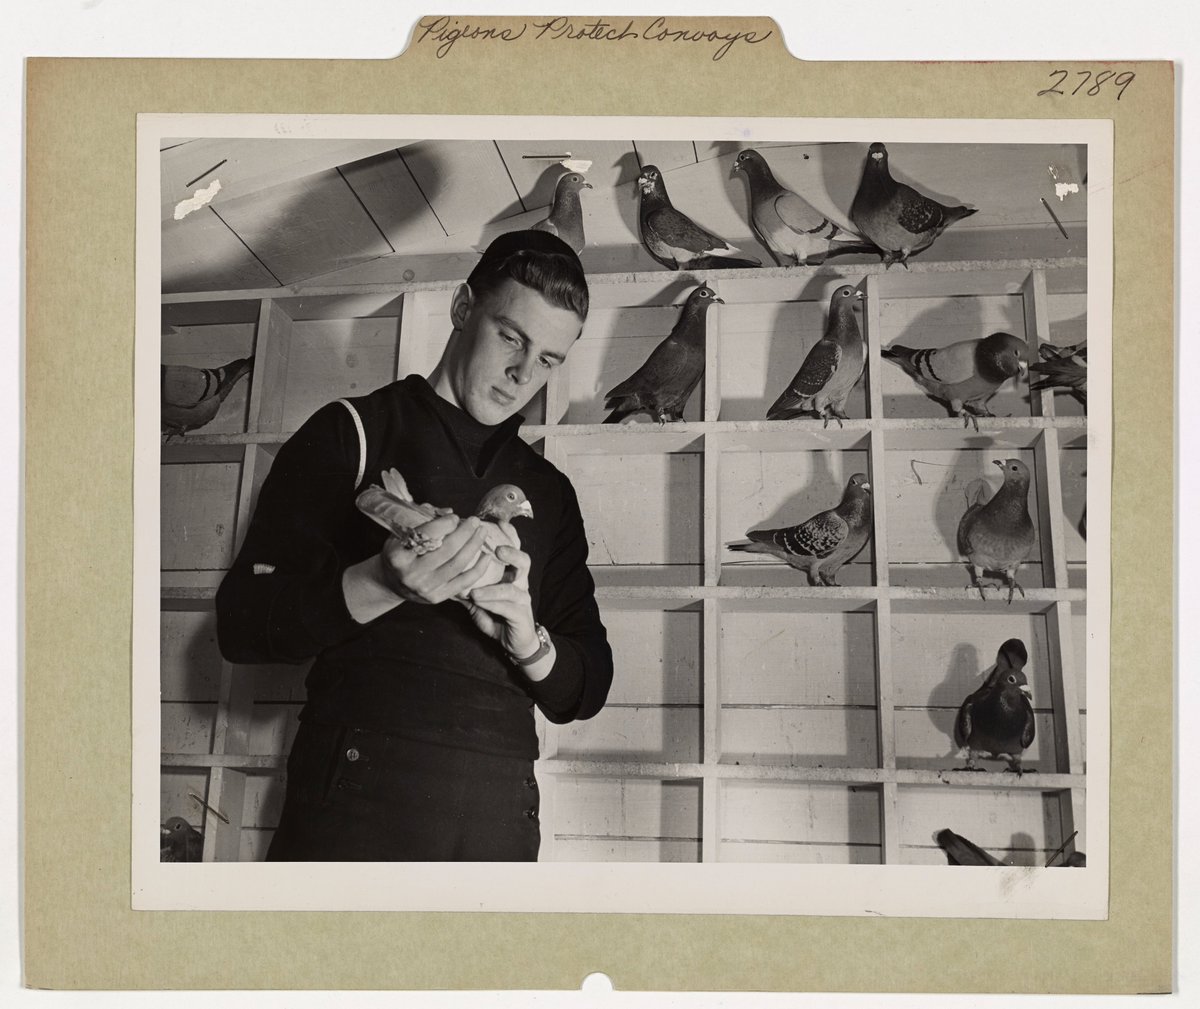 US Coast Guard pigeoneer inspects an aviation pigeon, WWII, c. 1945 (courtesy of the National Archives)